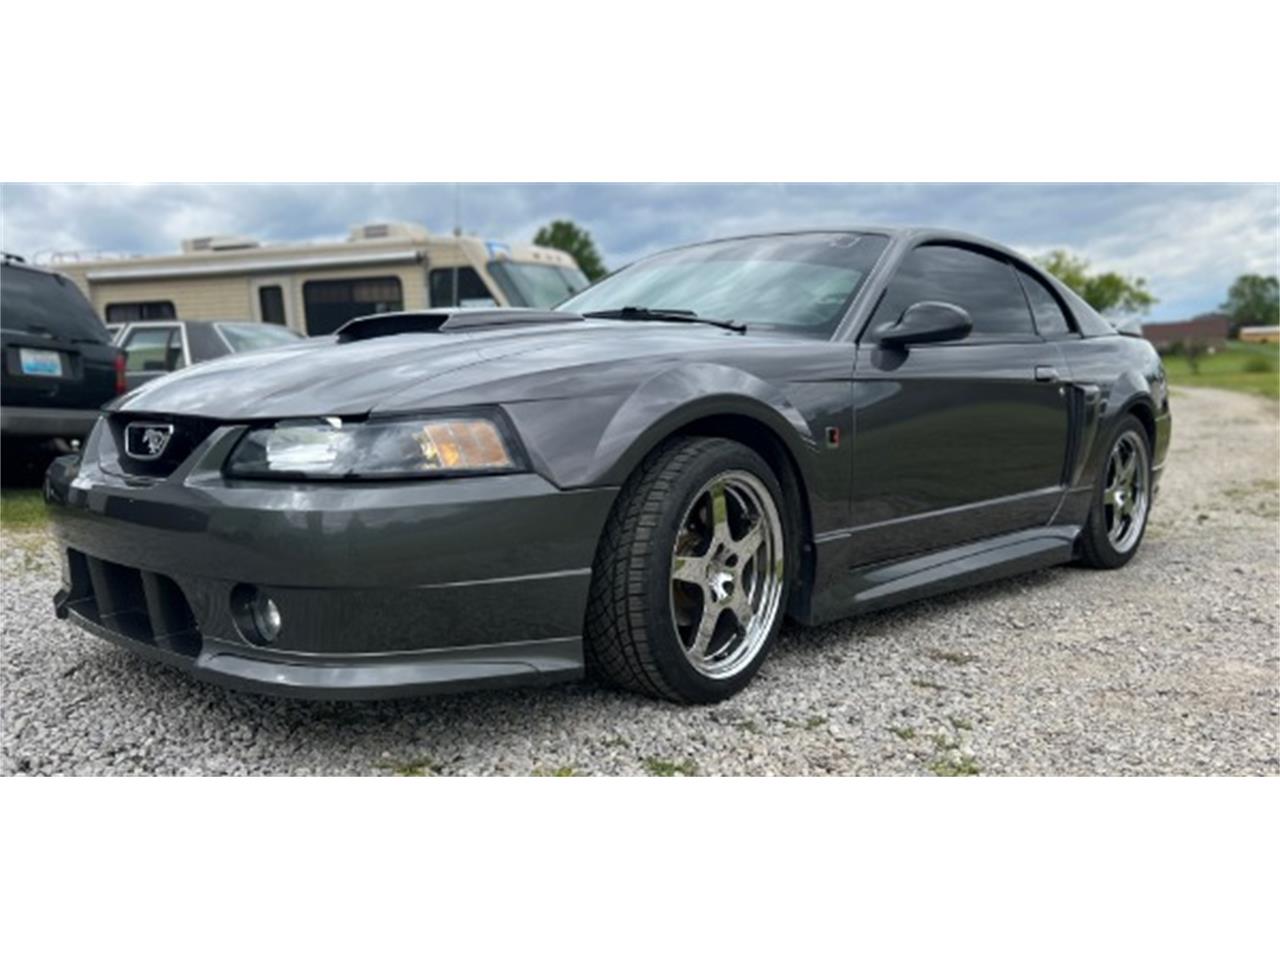 2004 Ford Mustang (Roush) for Sale | ClassicCars.com | CC-1757553